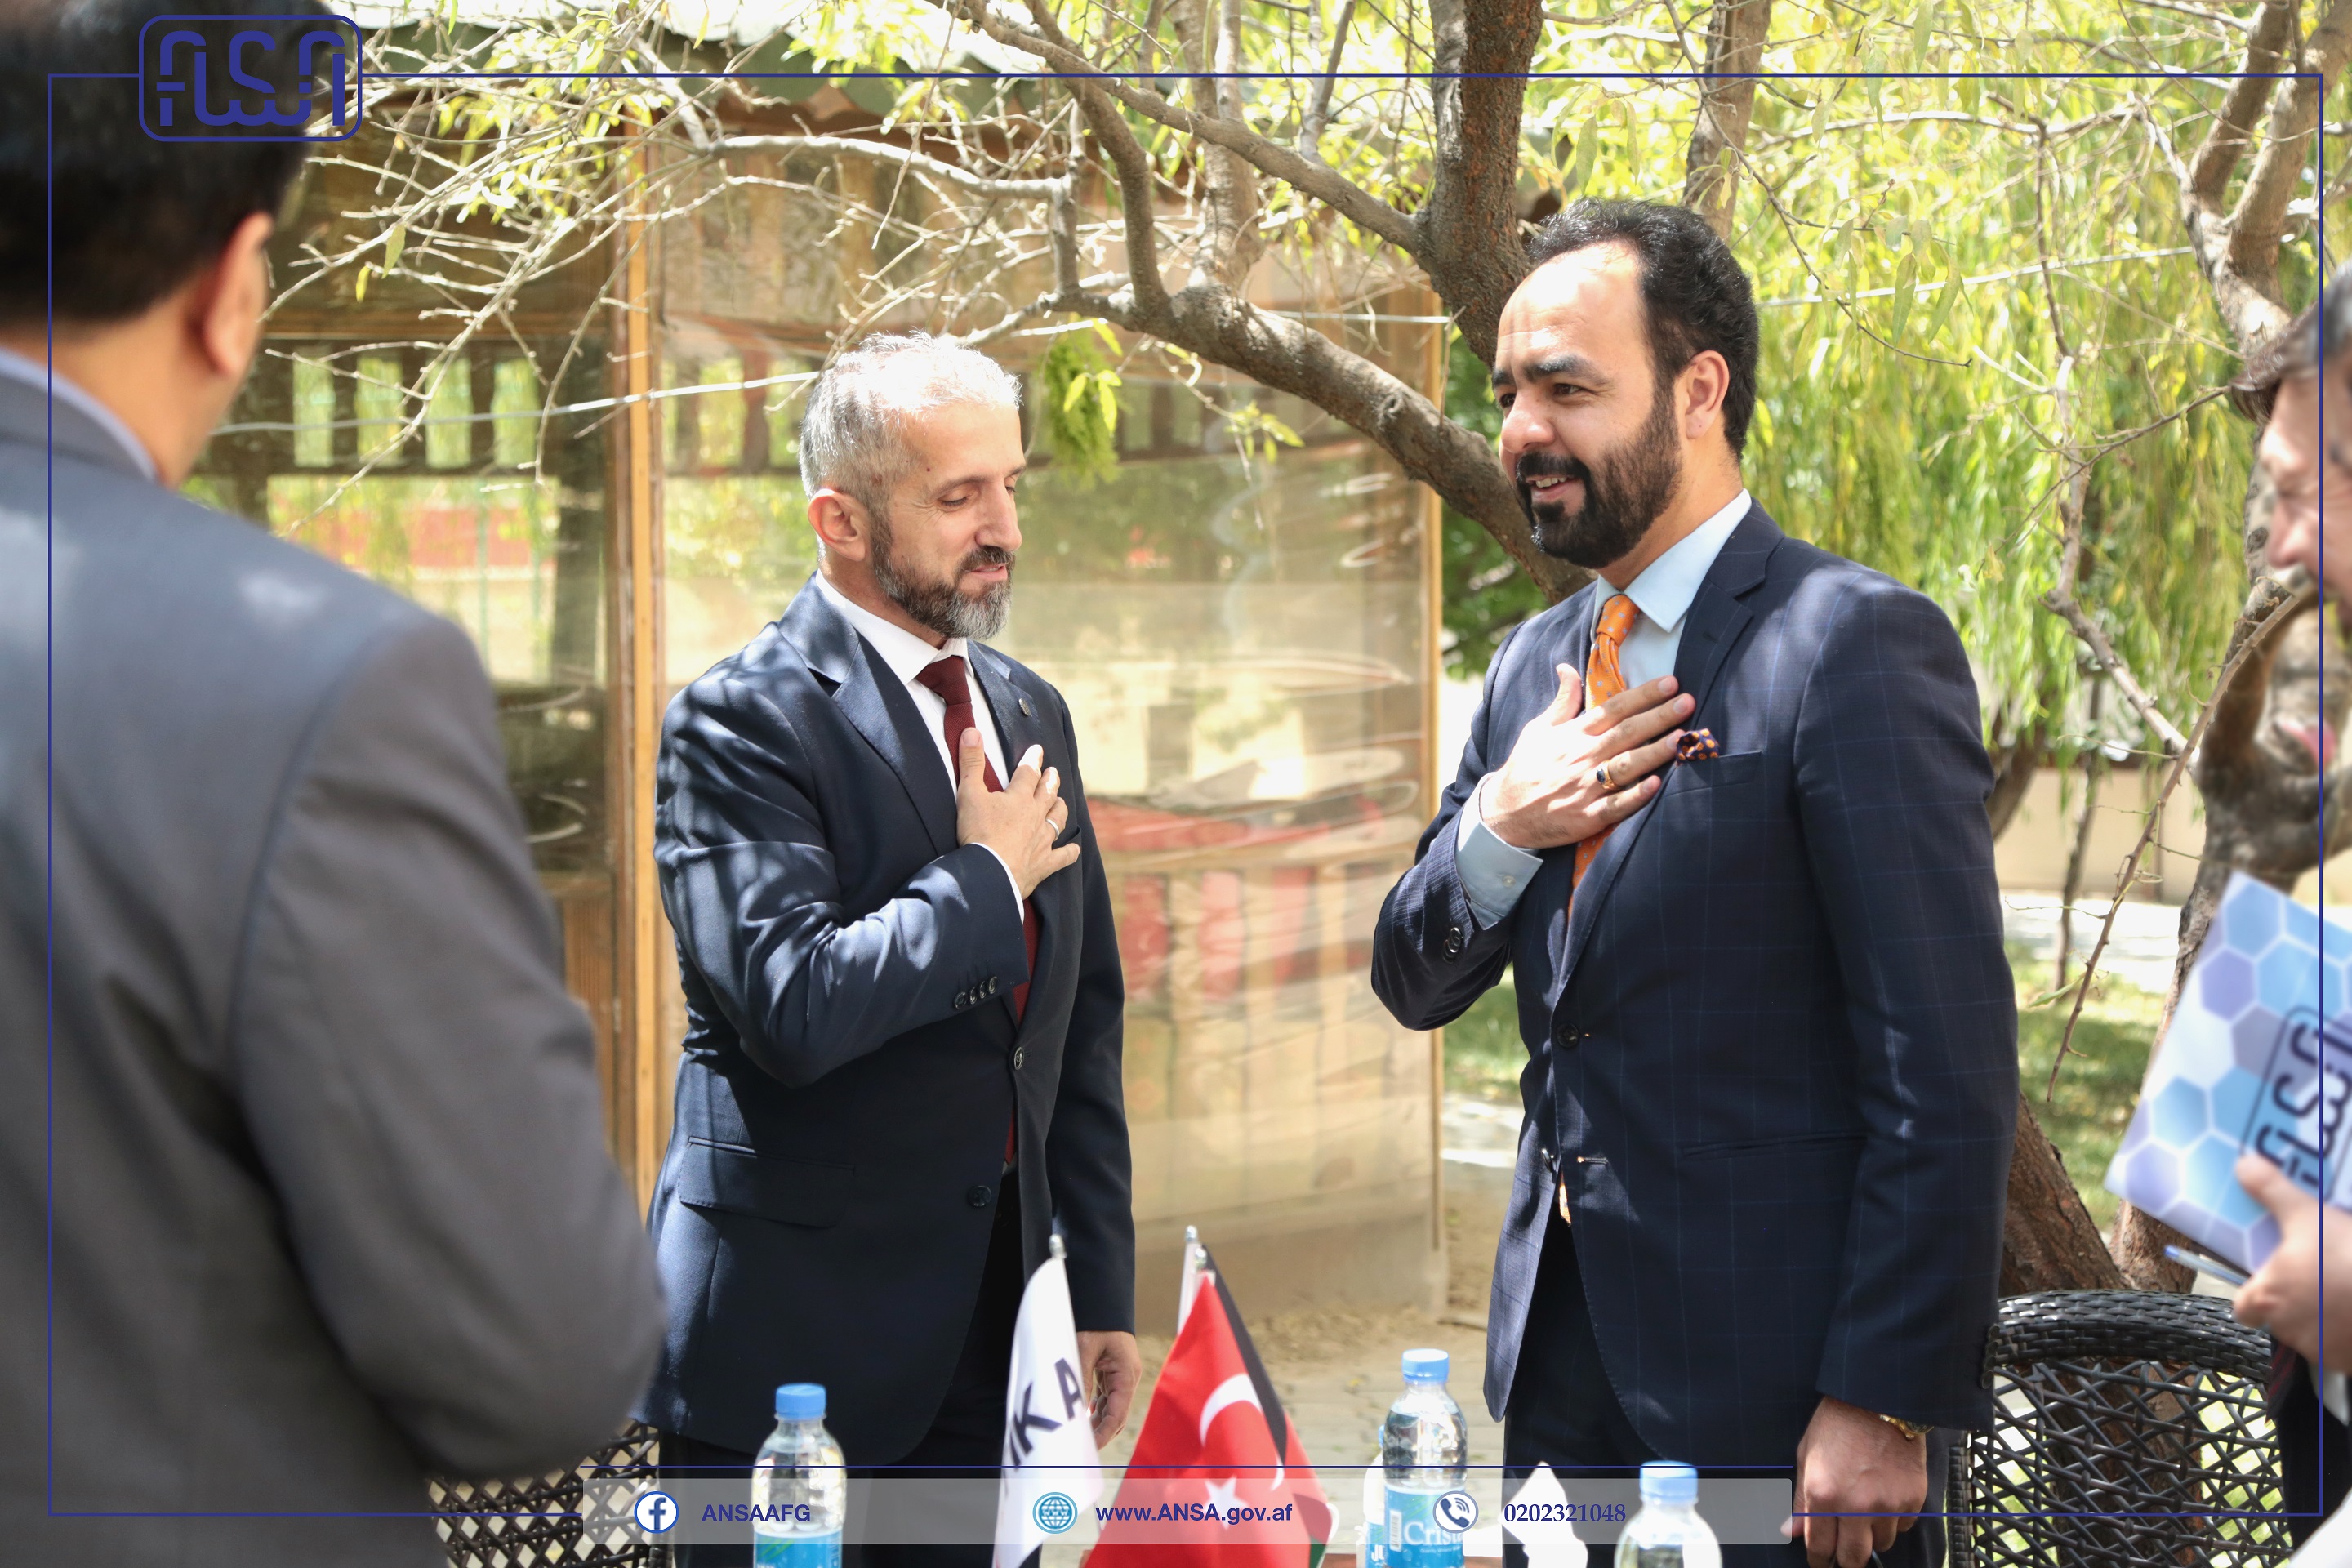 Afghanistan National Standards Authority held a joint meeting for bilateral cooperation between the agency of Coordination and Cooperation of the Islamic Republic of Turkey (TIKA).